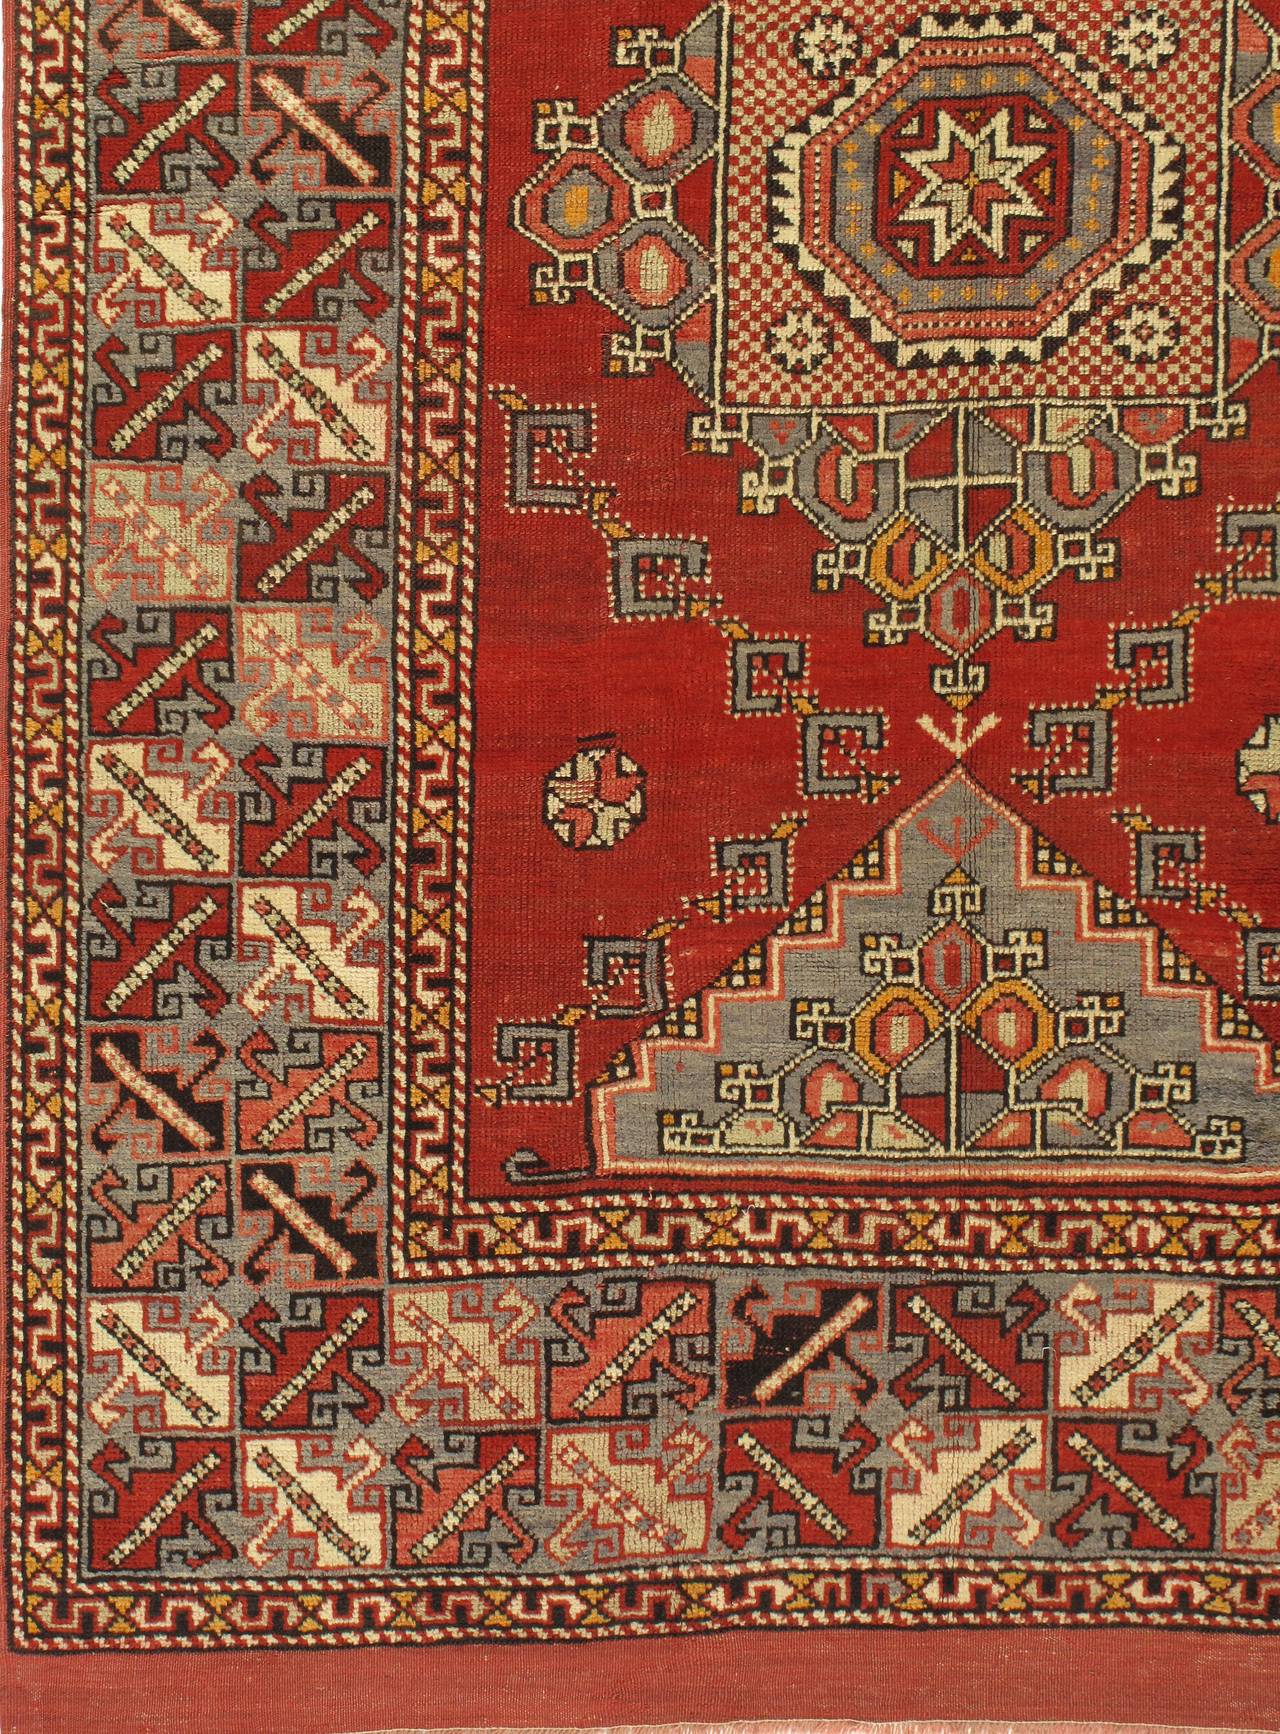 Vintage Turkish Oushak rug, circa 1940. Handwoven in Turkey where rug weaving is the culture rather than a business. Rugs from Oushak are known for the high quality of their wool their beautiful patterns and warm colors. These designer favourites